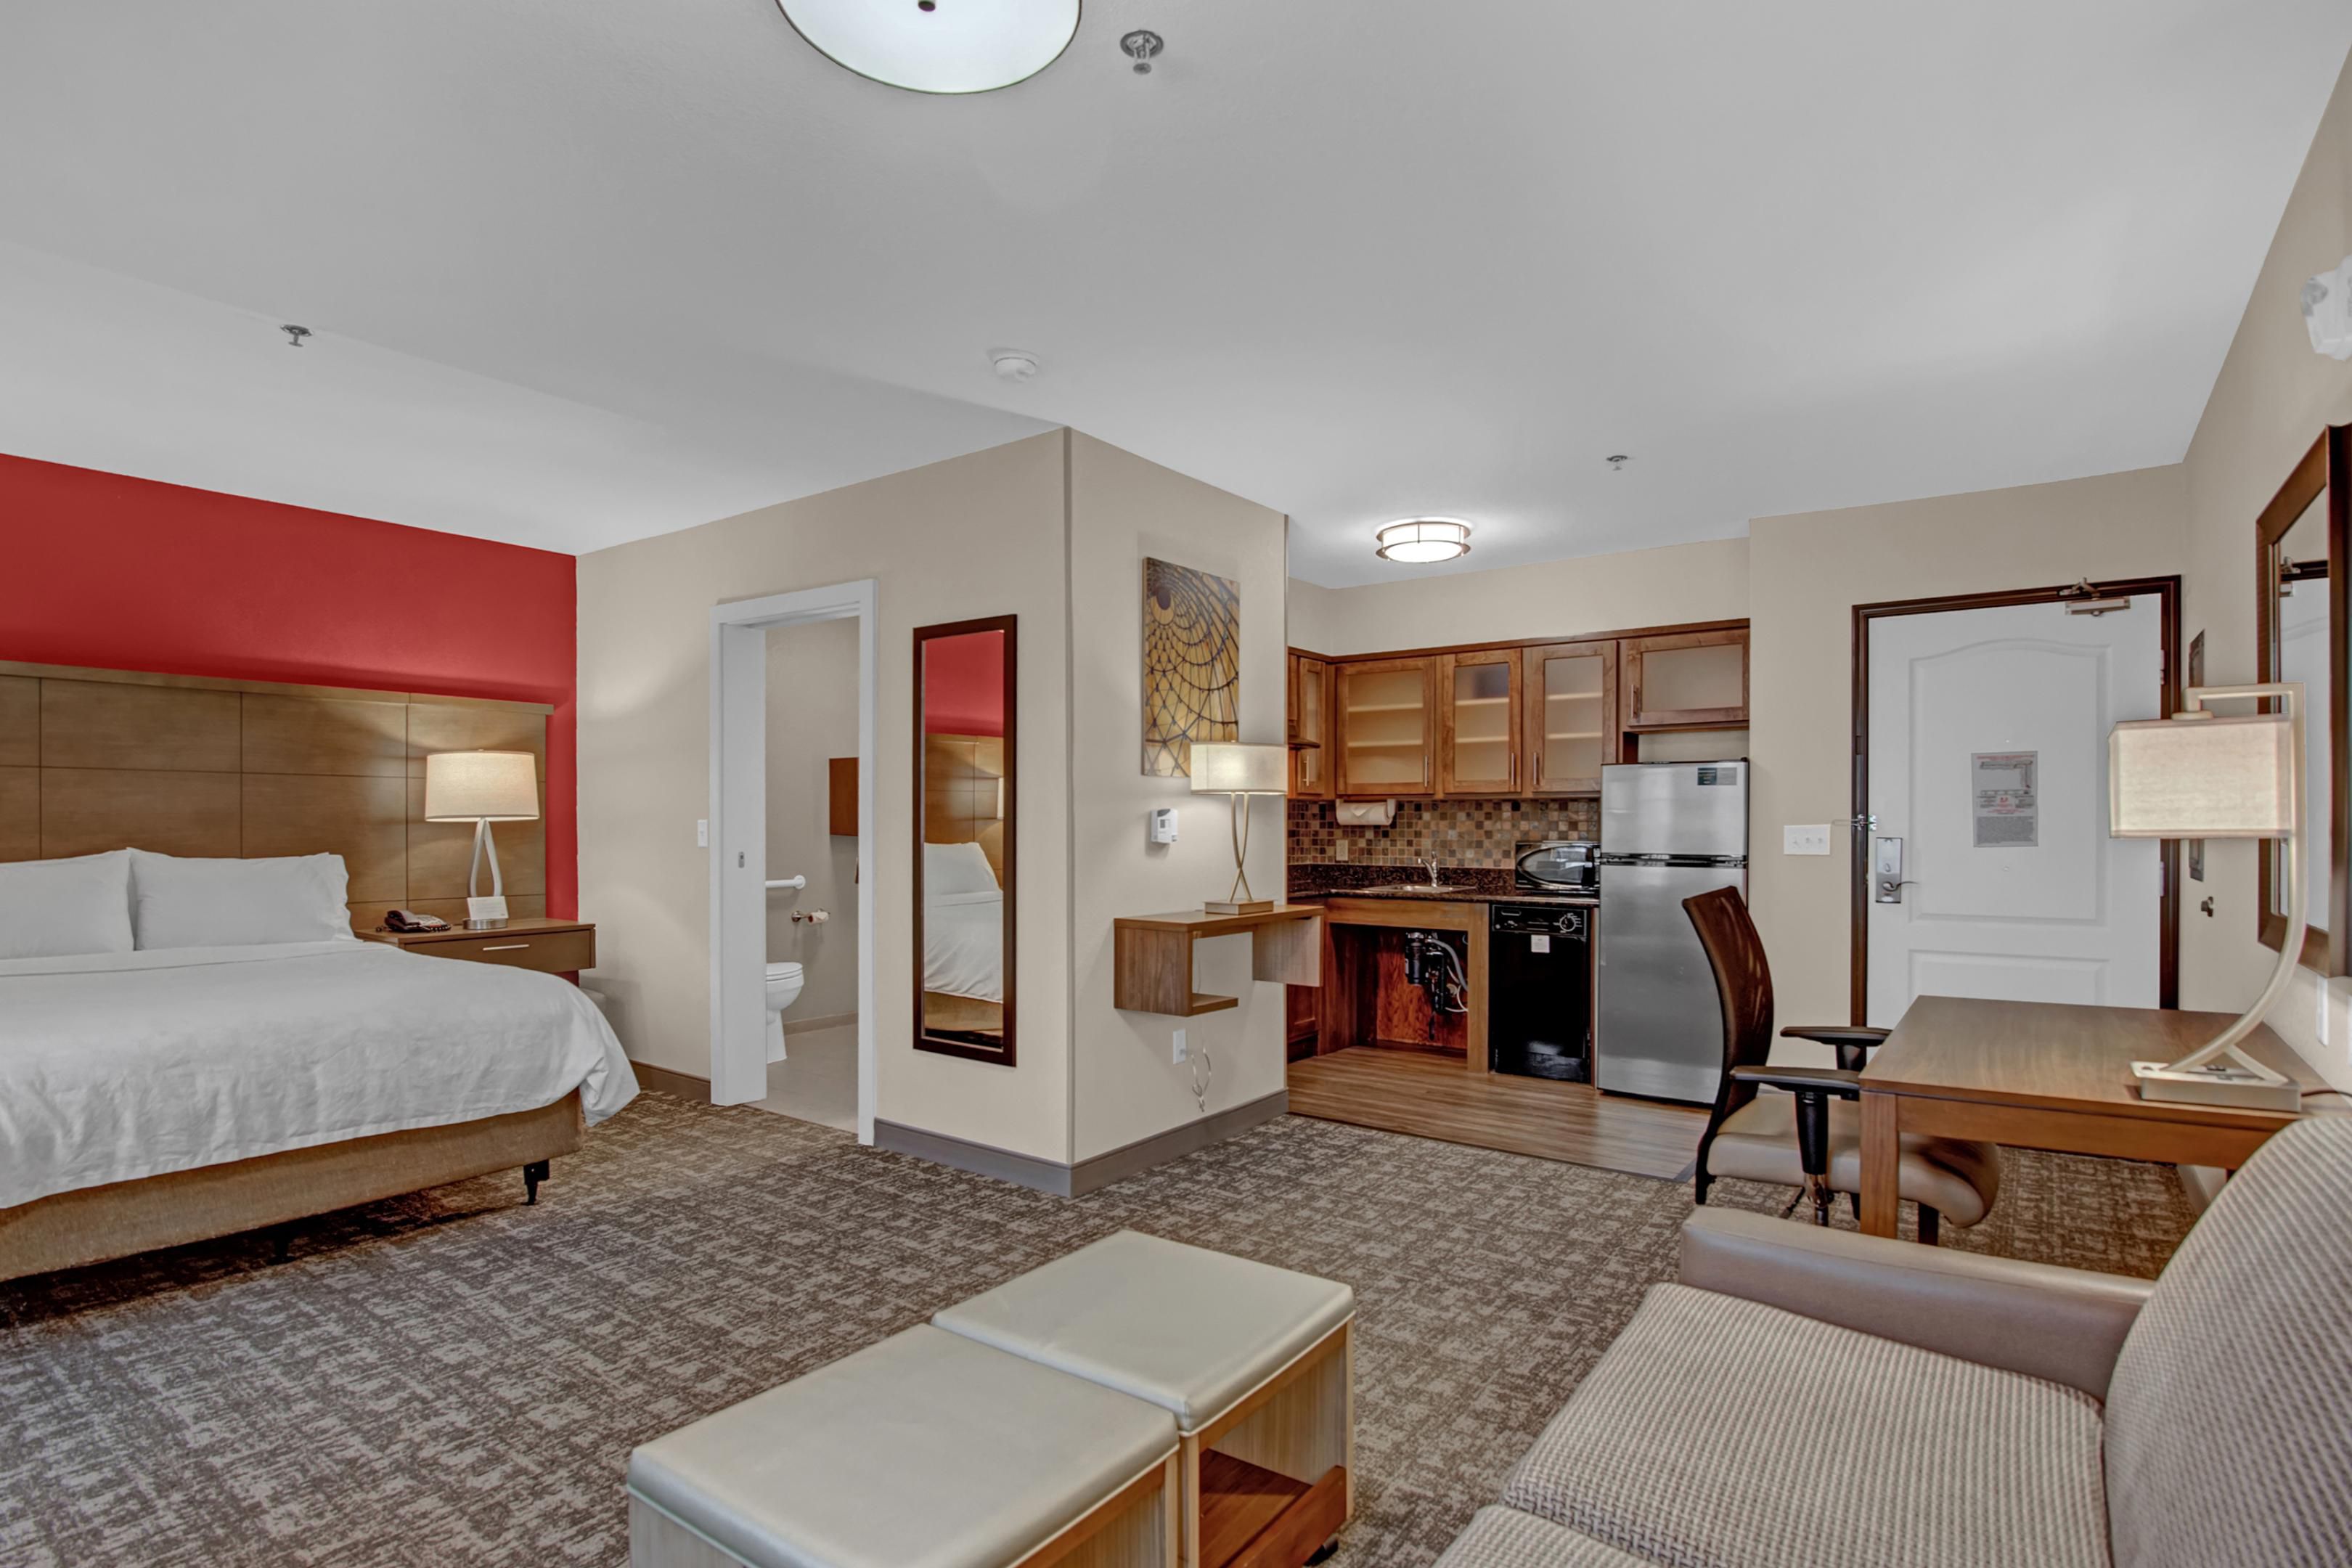 Whether you are staying for a short trip or an extended stay, our spacious suites are designed so you can flex from productivity to relaxation. Spread out in our All Suite Hotel, featuring fully equipped kitchens, large work spaces, and comfortable living space with large, flat screen TV and sleeper sofa.